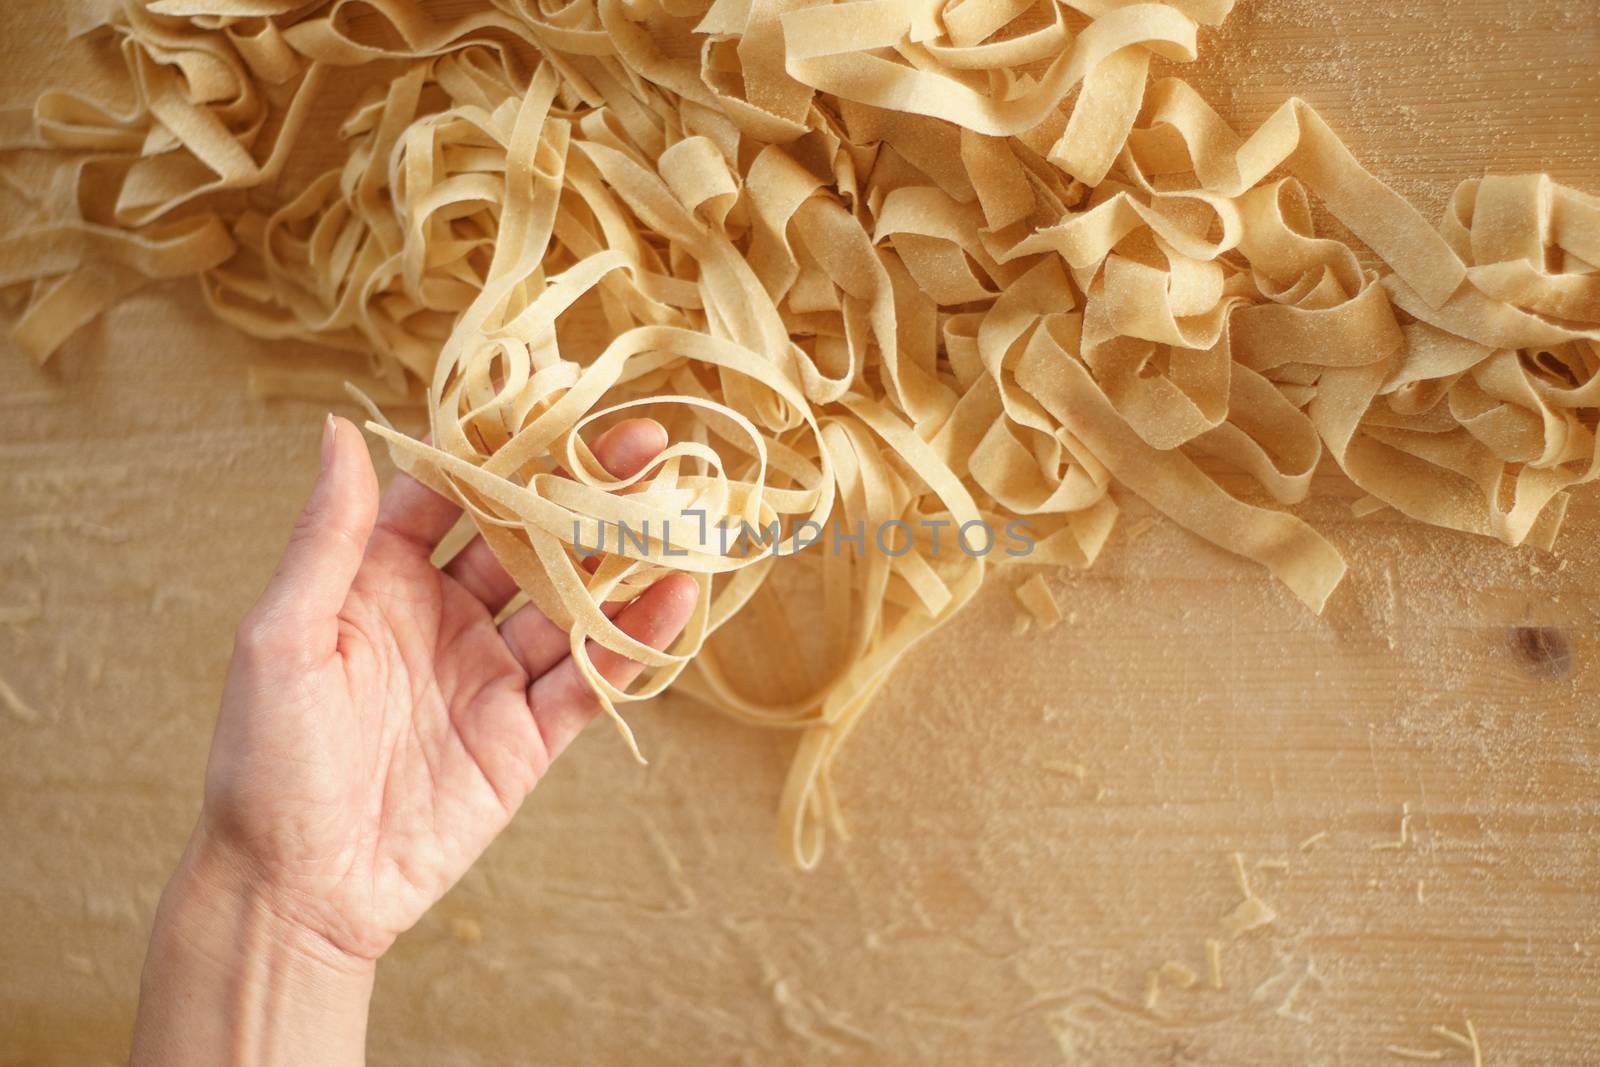 Preparing fresh homemade pasta: close-up view of woman's hand pulling up some fresh tagliatelle on wooden work table in natural sunlight by robbyfontanesi